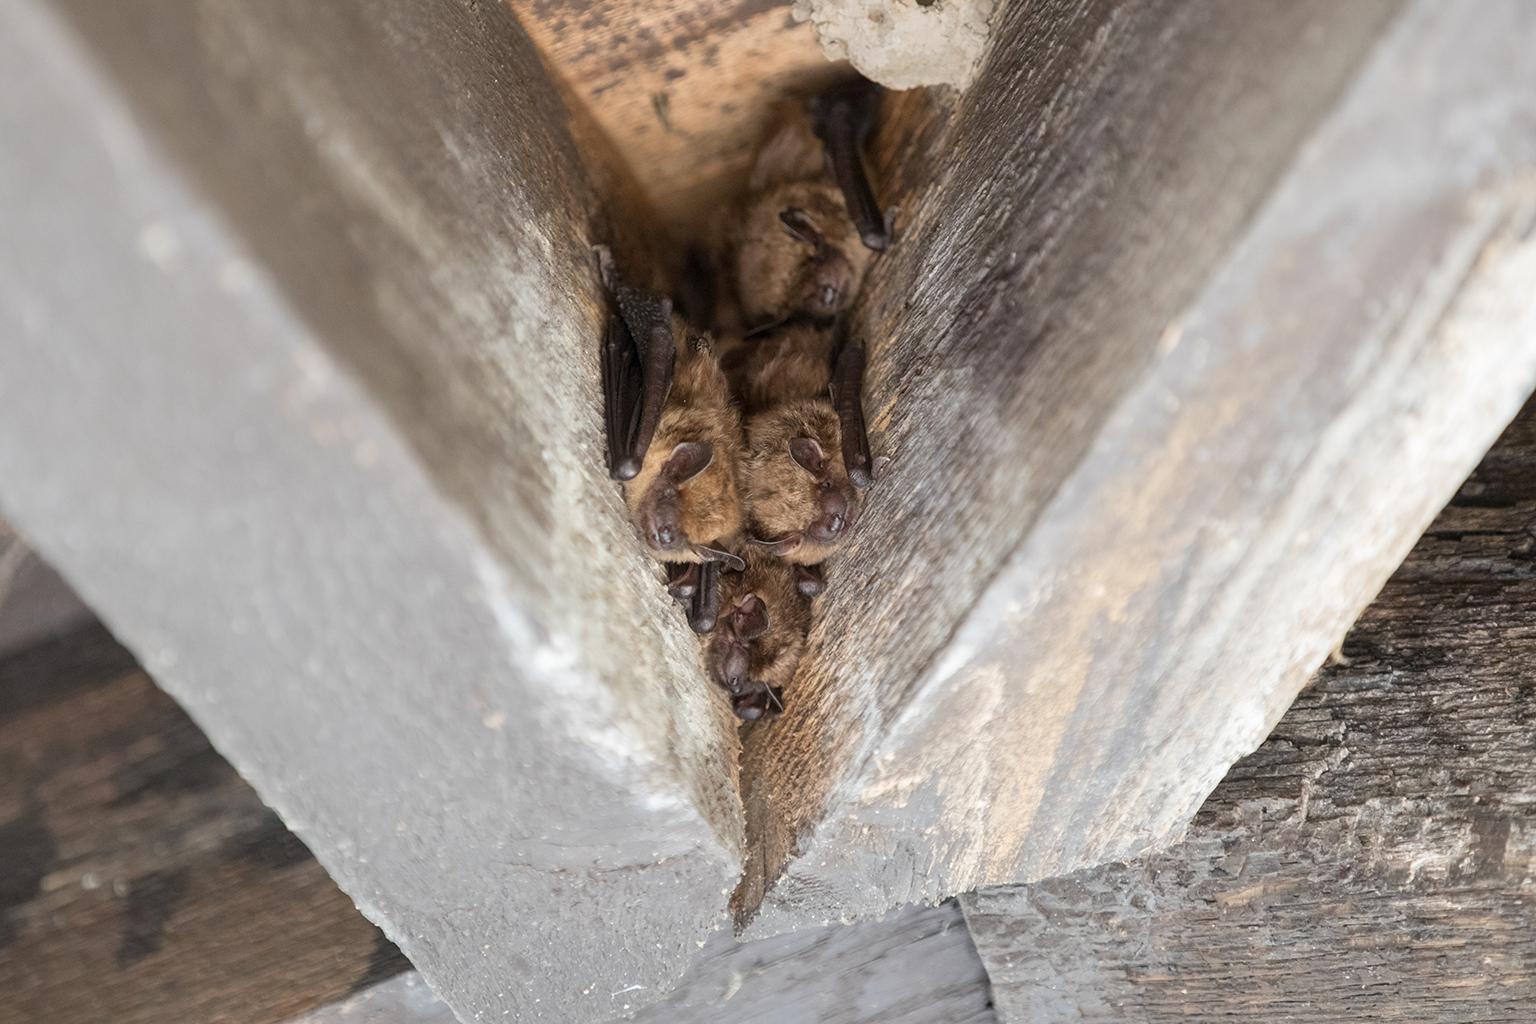 Lincoln Park Zoo staff look for bat roosts, like the one pictured here, to collect samples of the bats' guano, or poop. (Courtesy Lincoln Park Zoo)